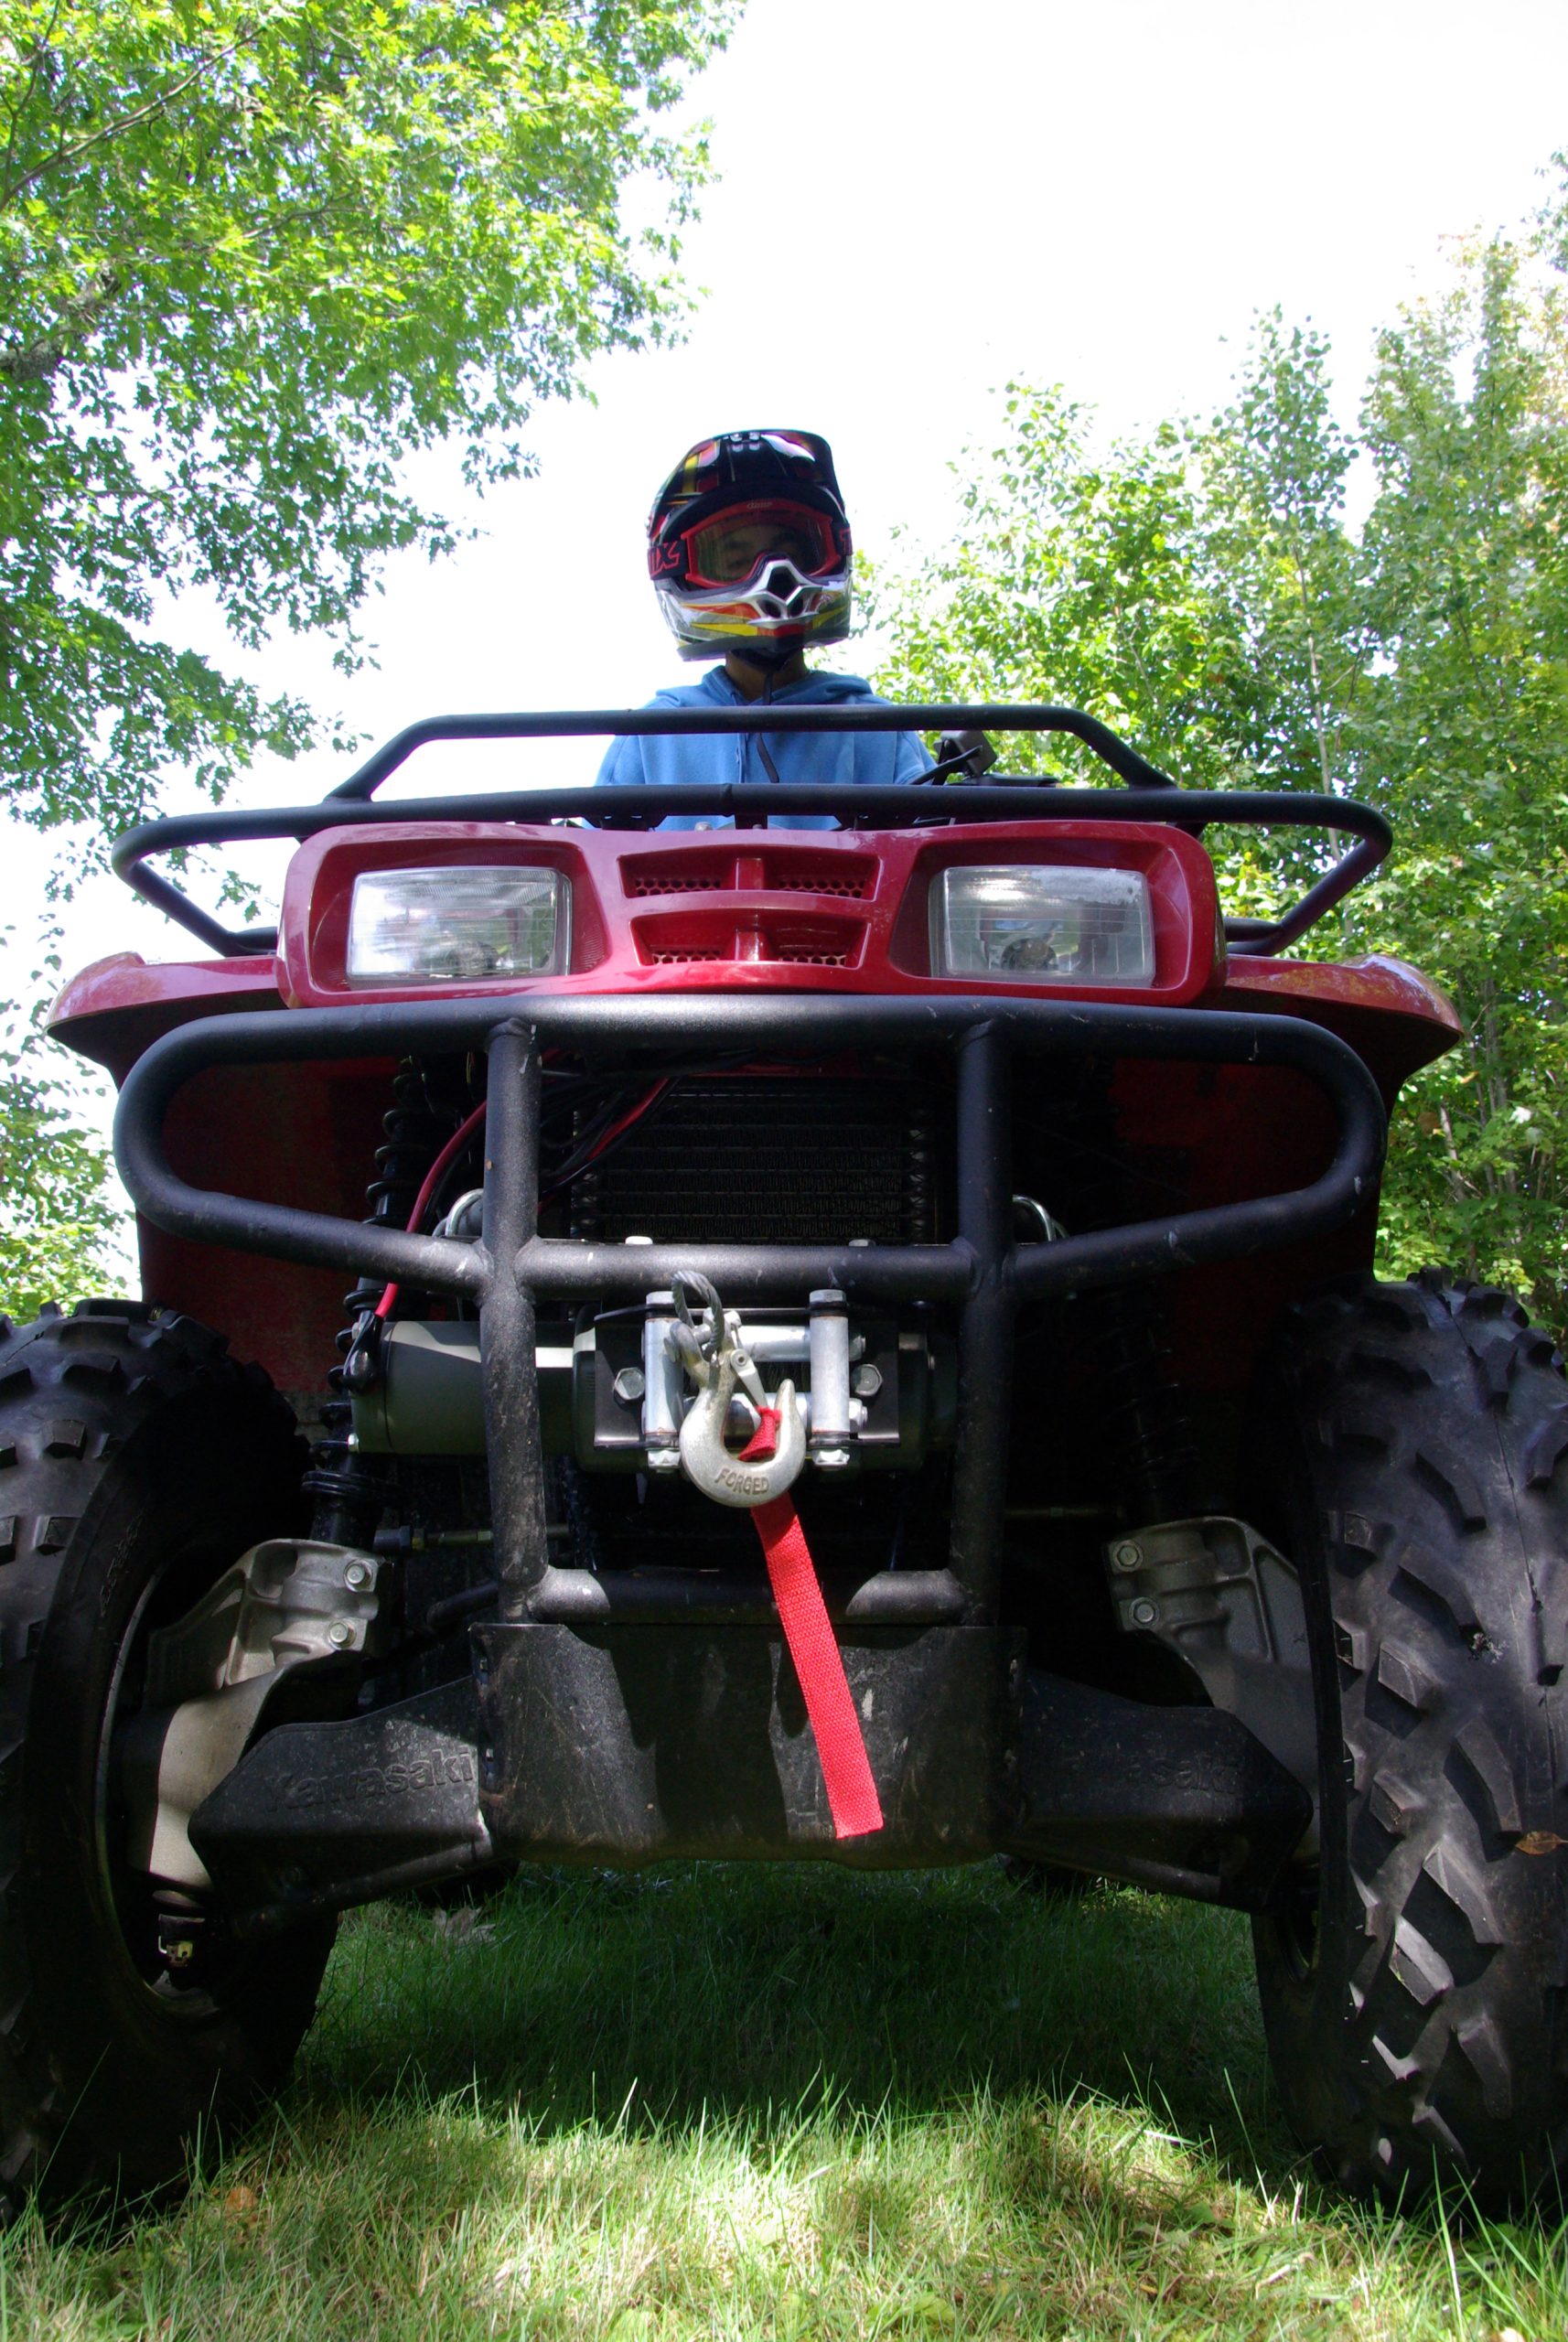 Dustin On His Atv (user submitted)